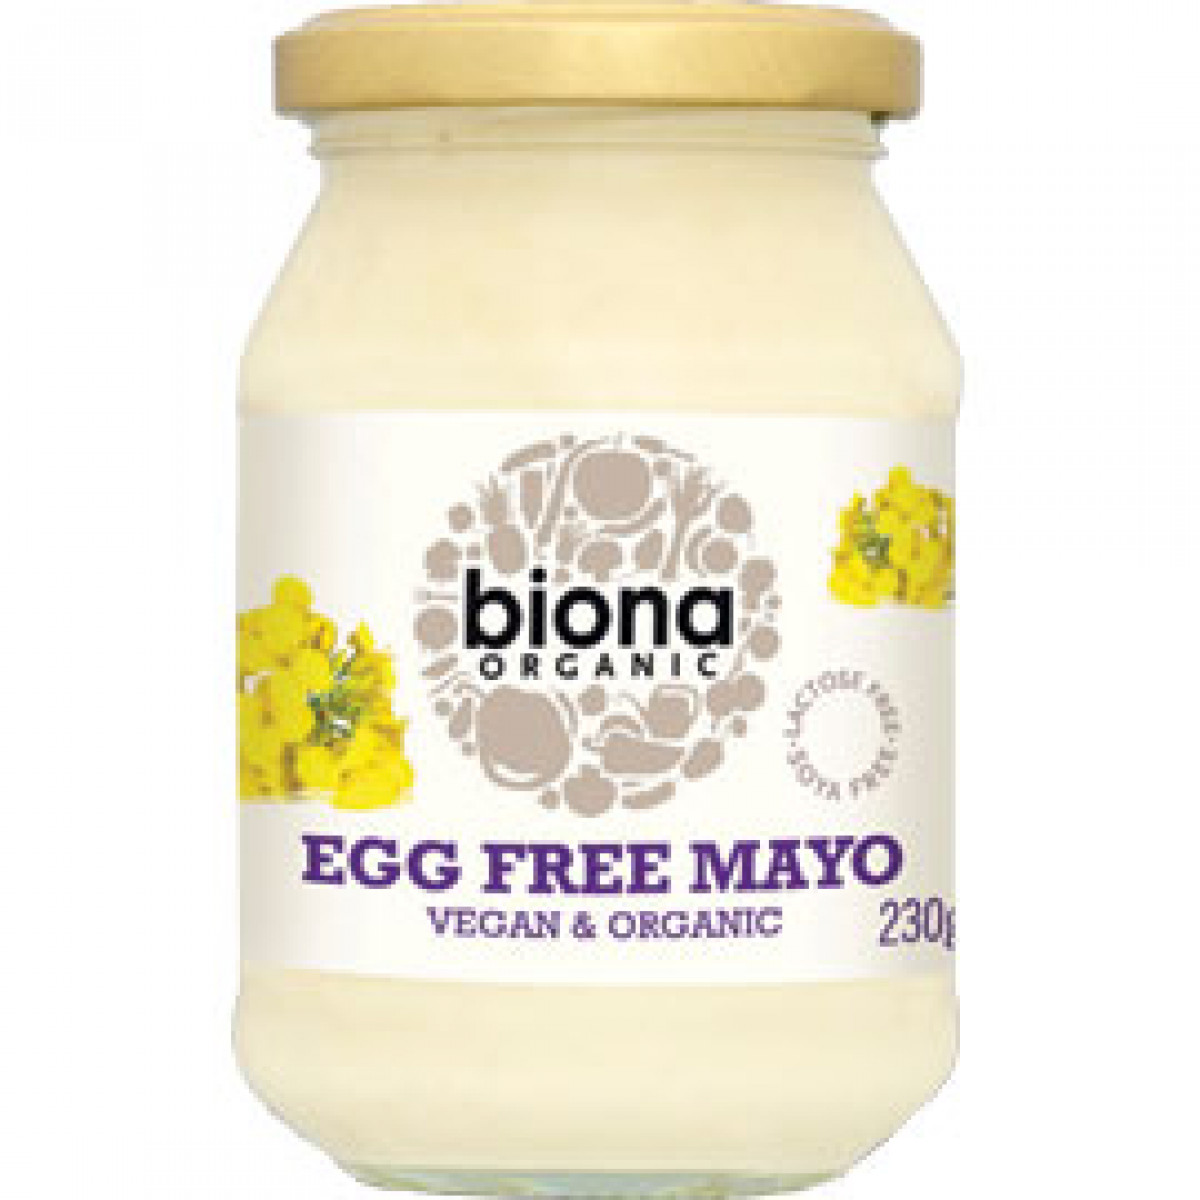 Product picture for Egg Free Mayo